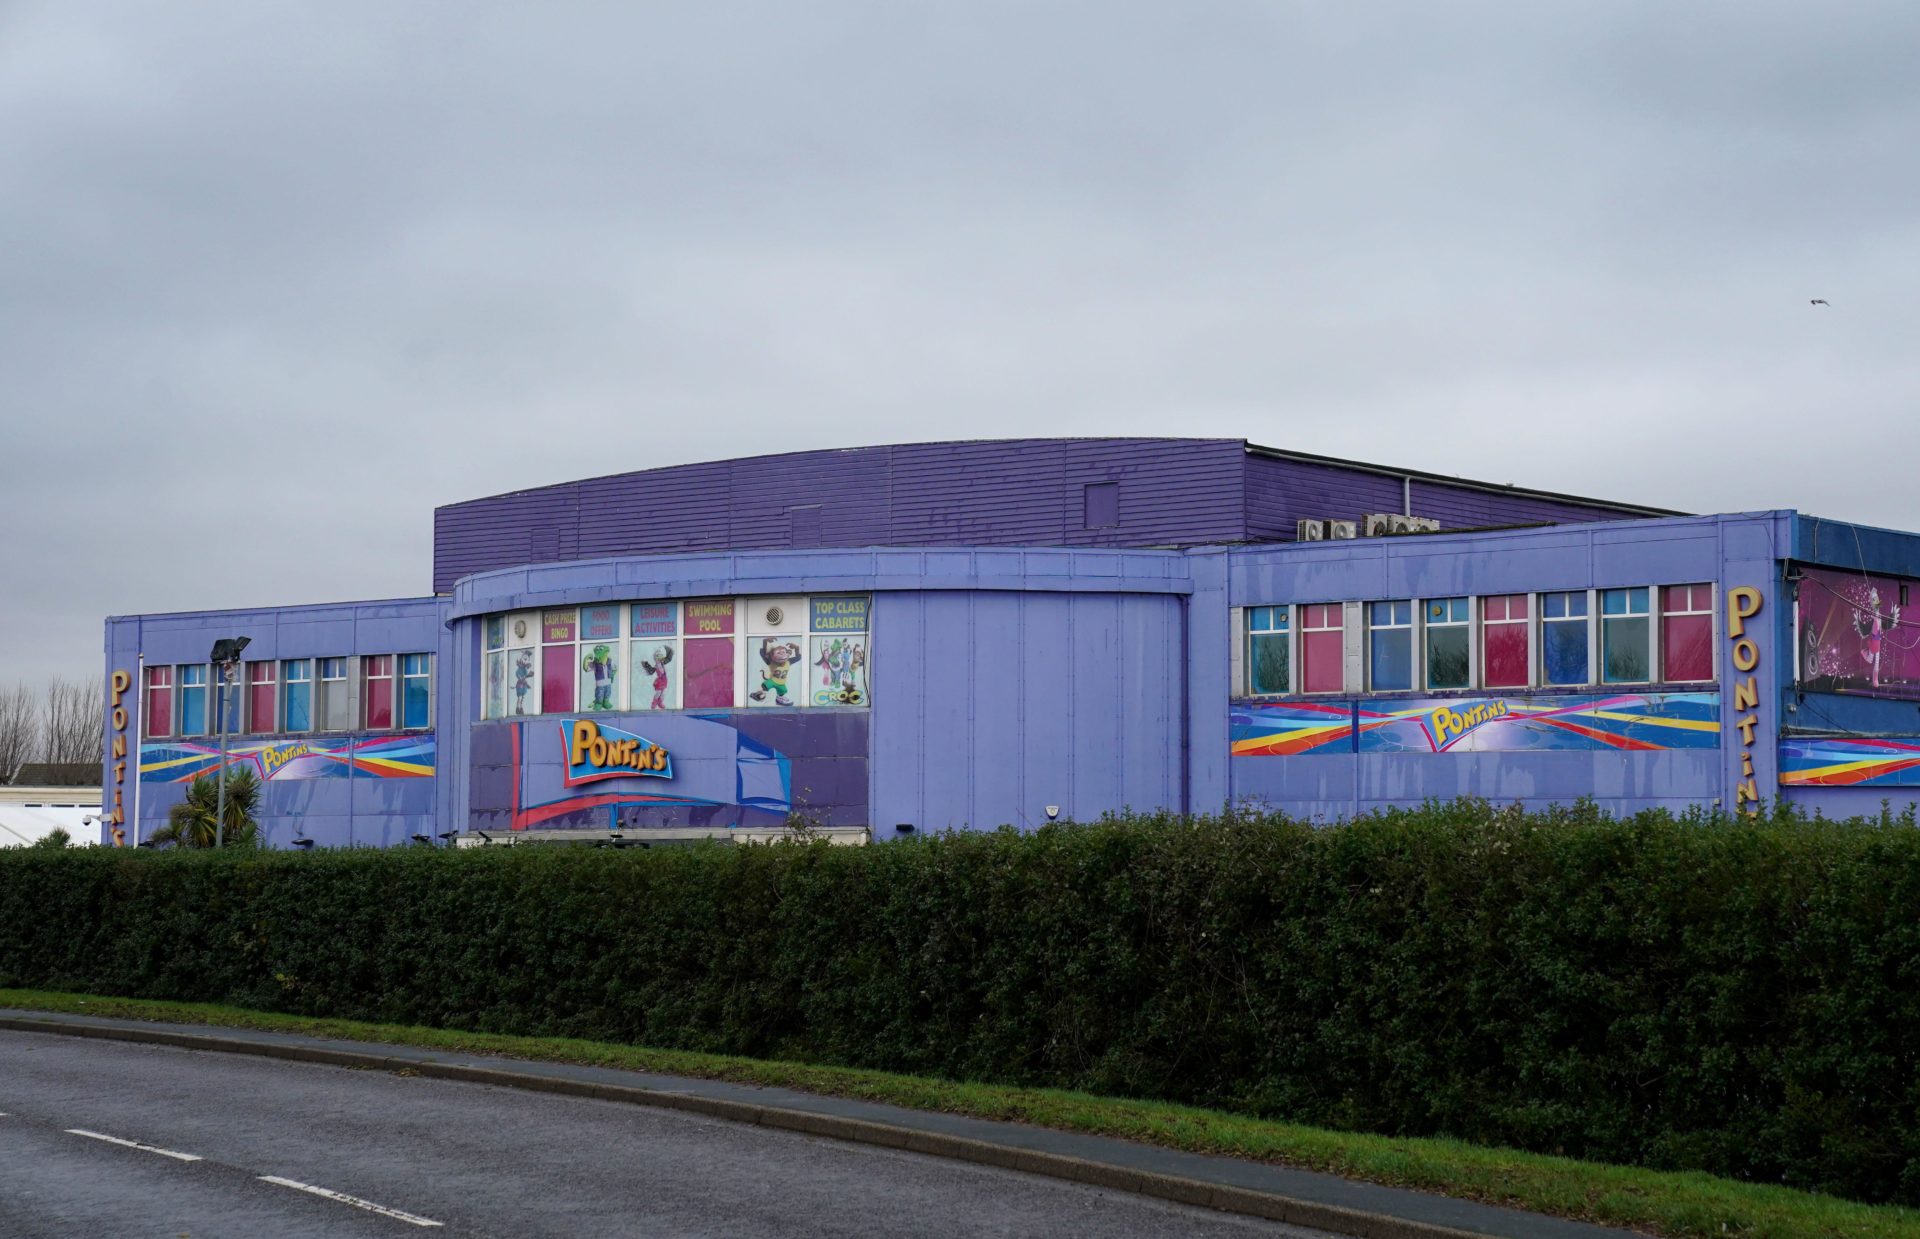 Pontins holiday park in Camber Sands, East Sussex, after the company announced the immediate closure of the site along with another of their sites in Prestatyn, Wales.